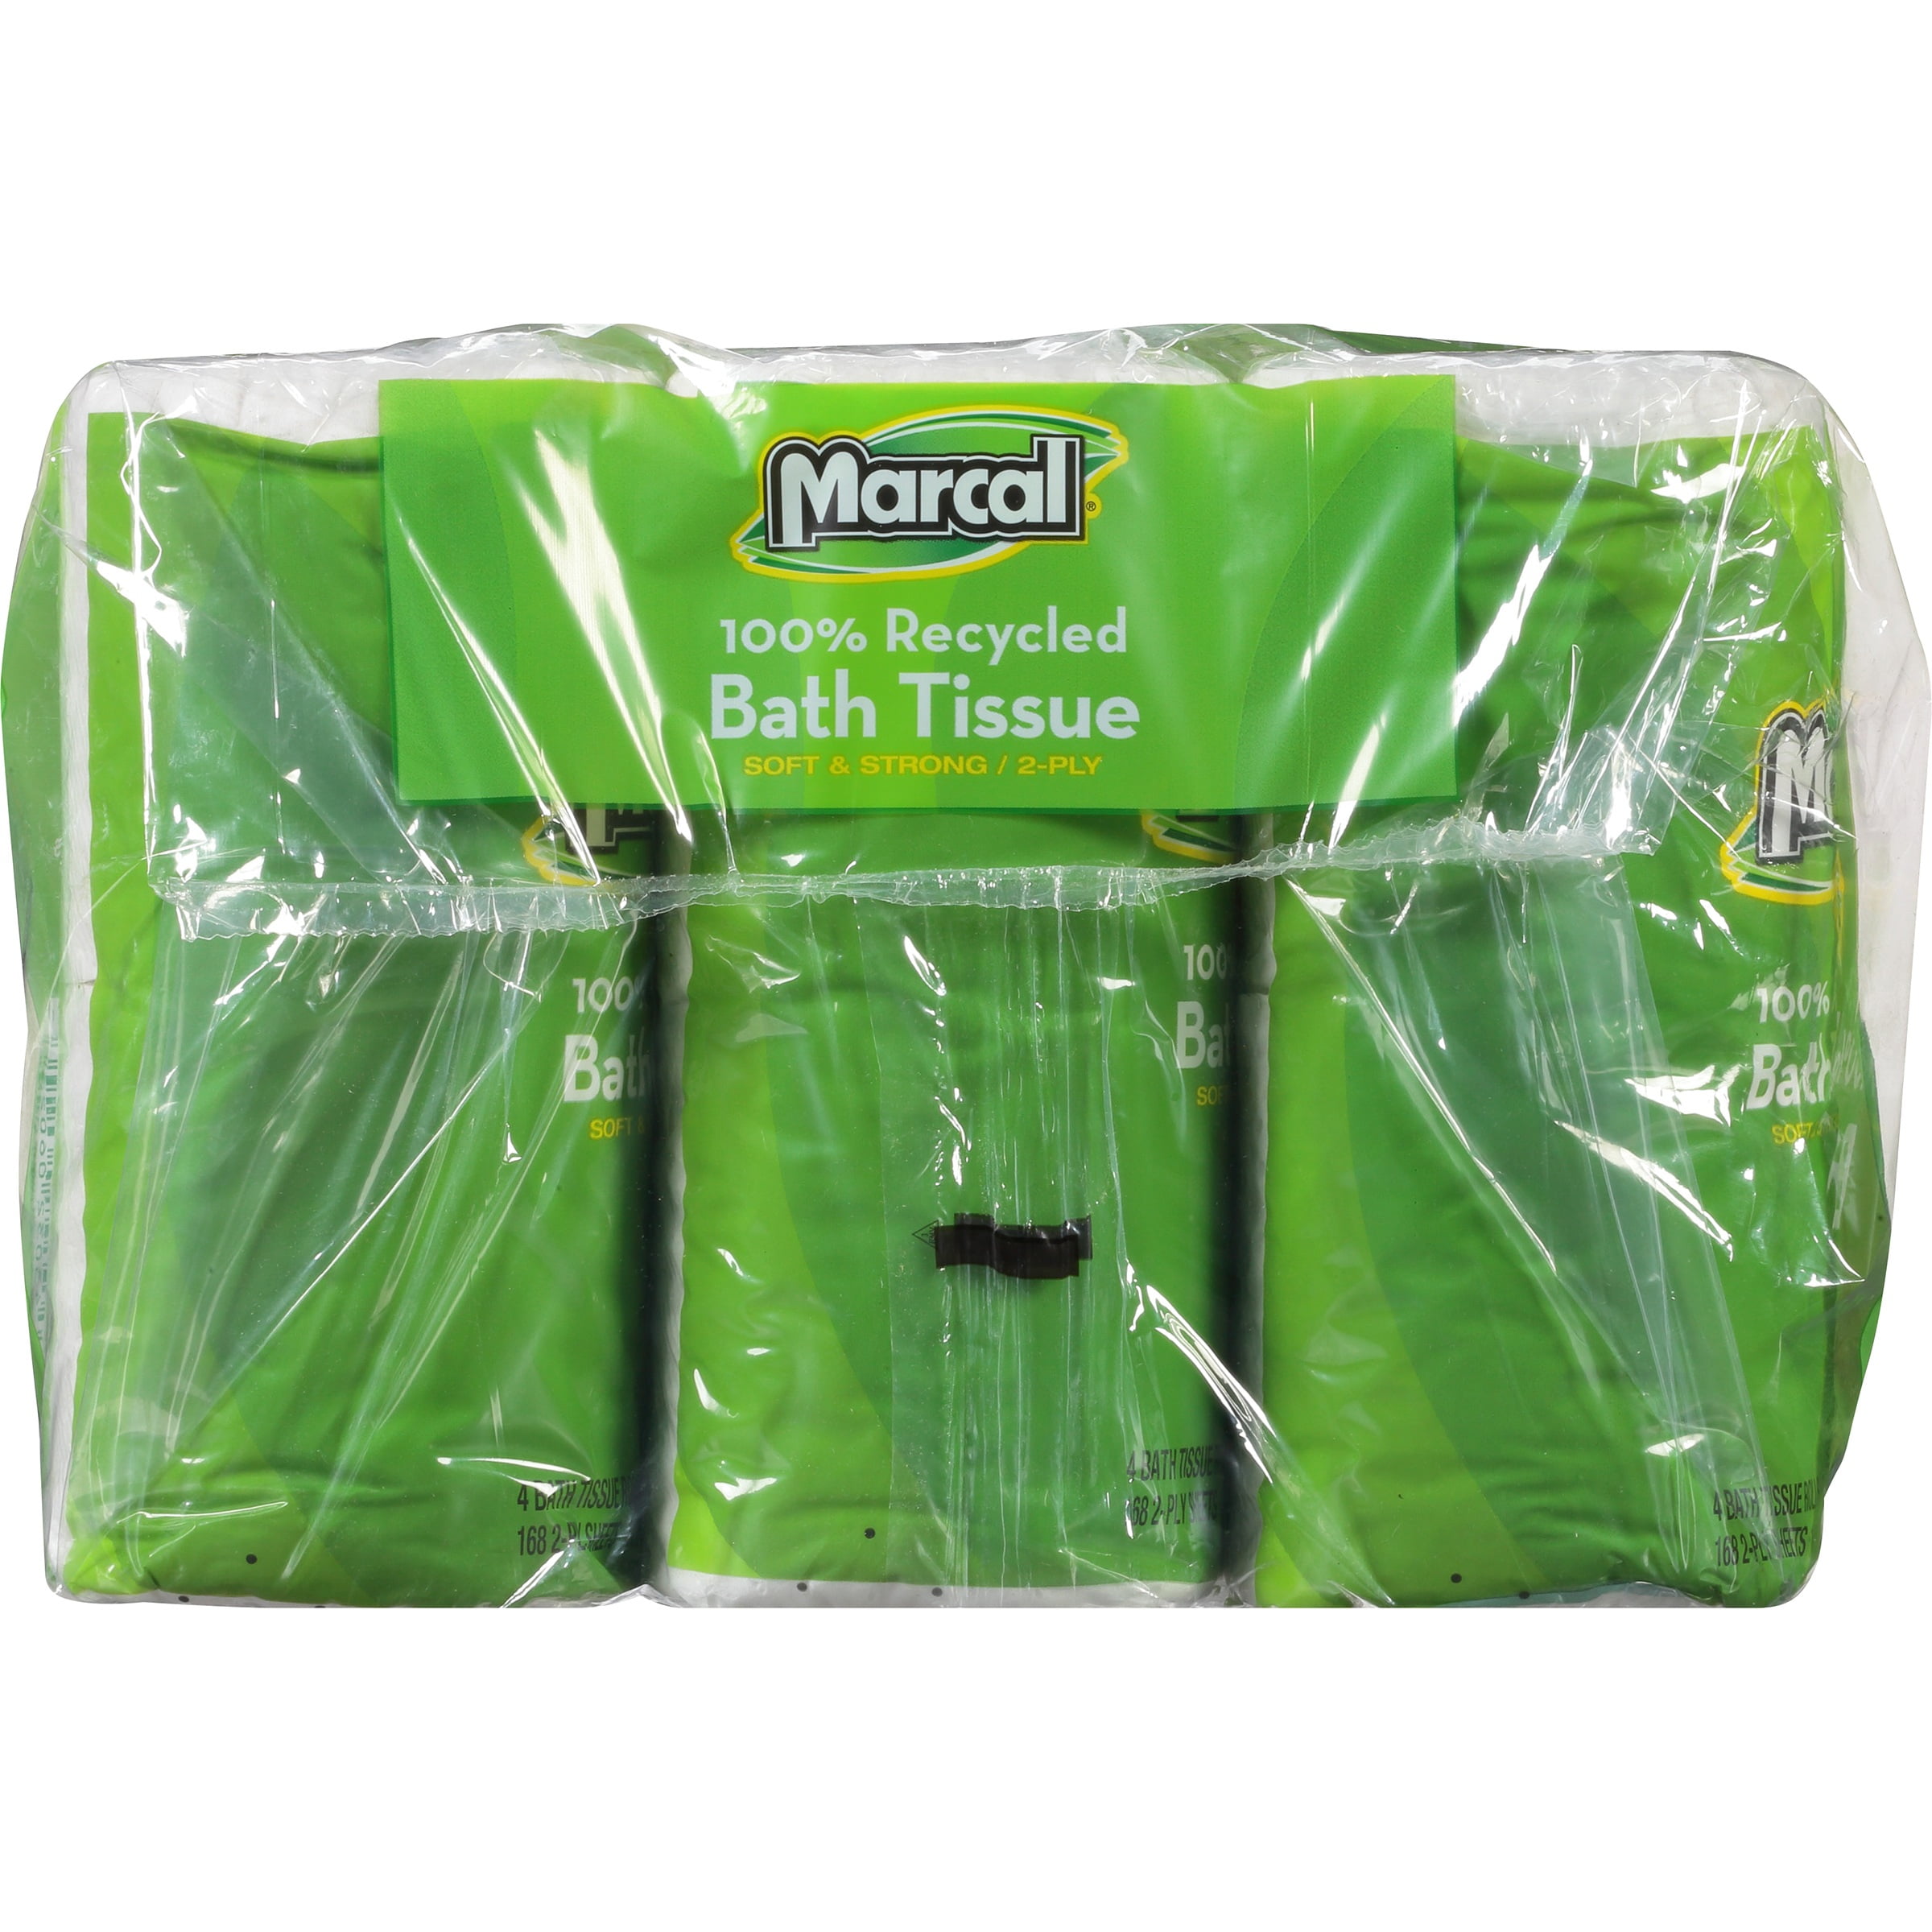 Marcal Recycled Toilet Paper, 24 Big Rolls - 3